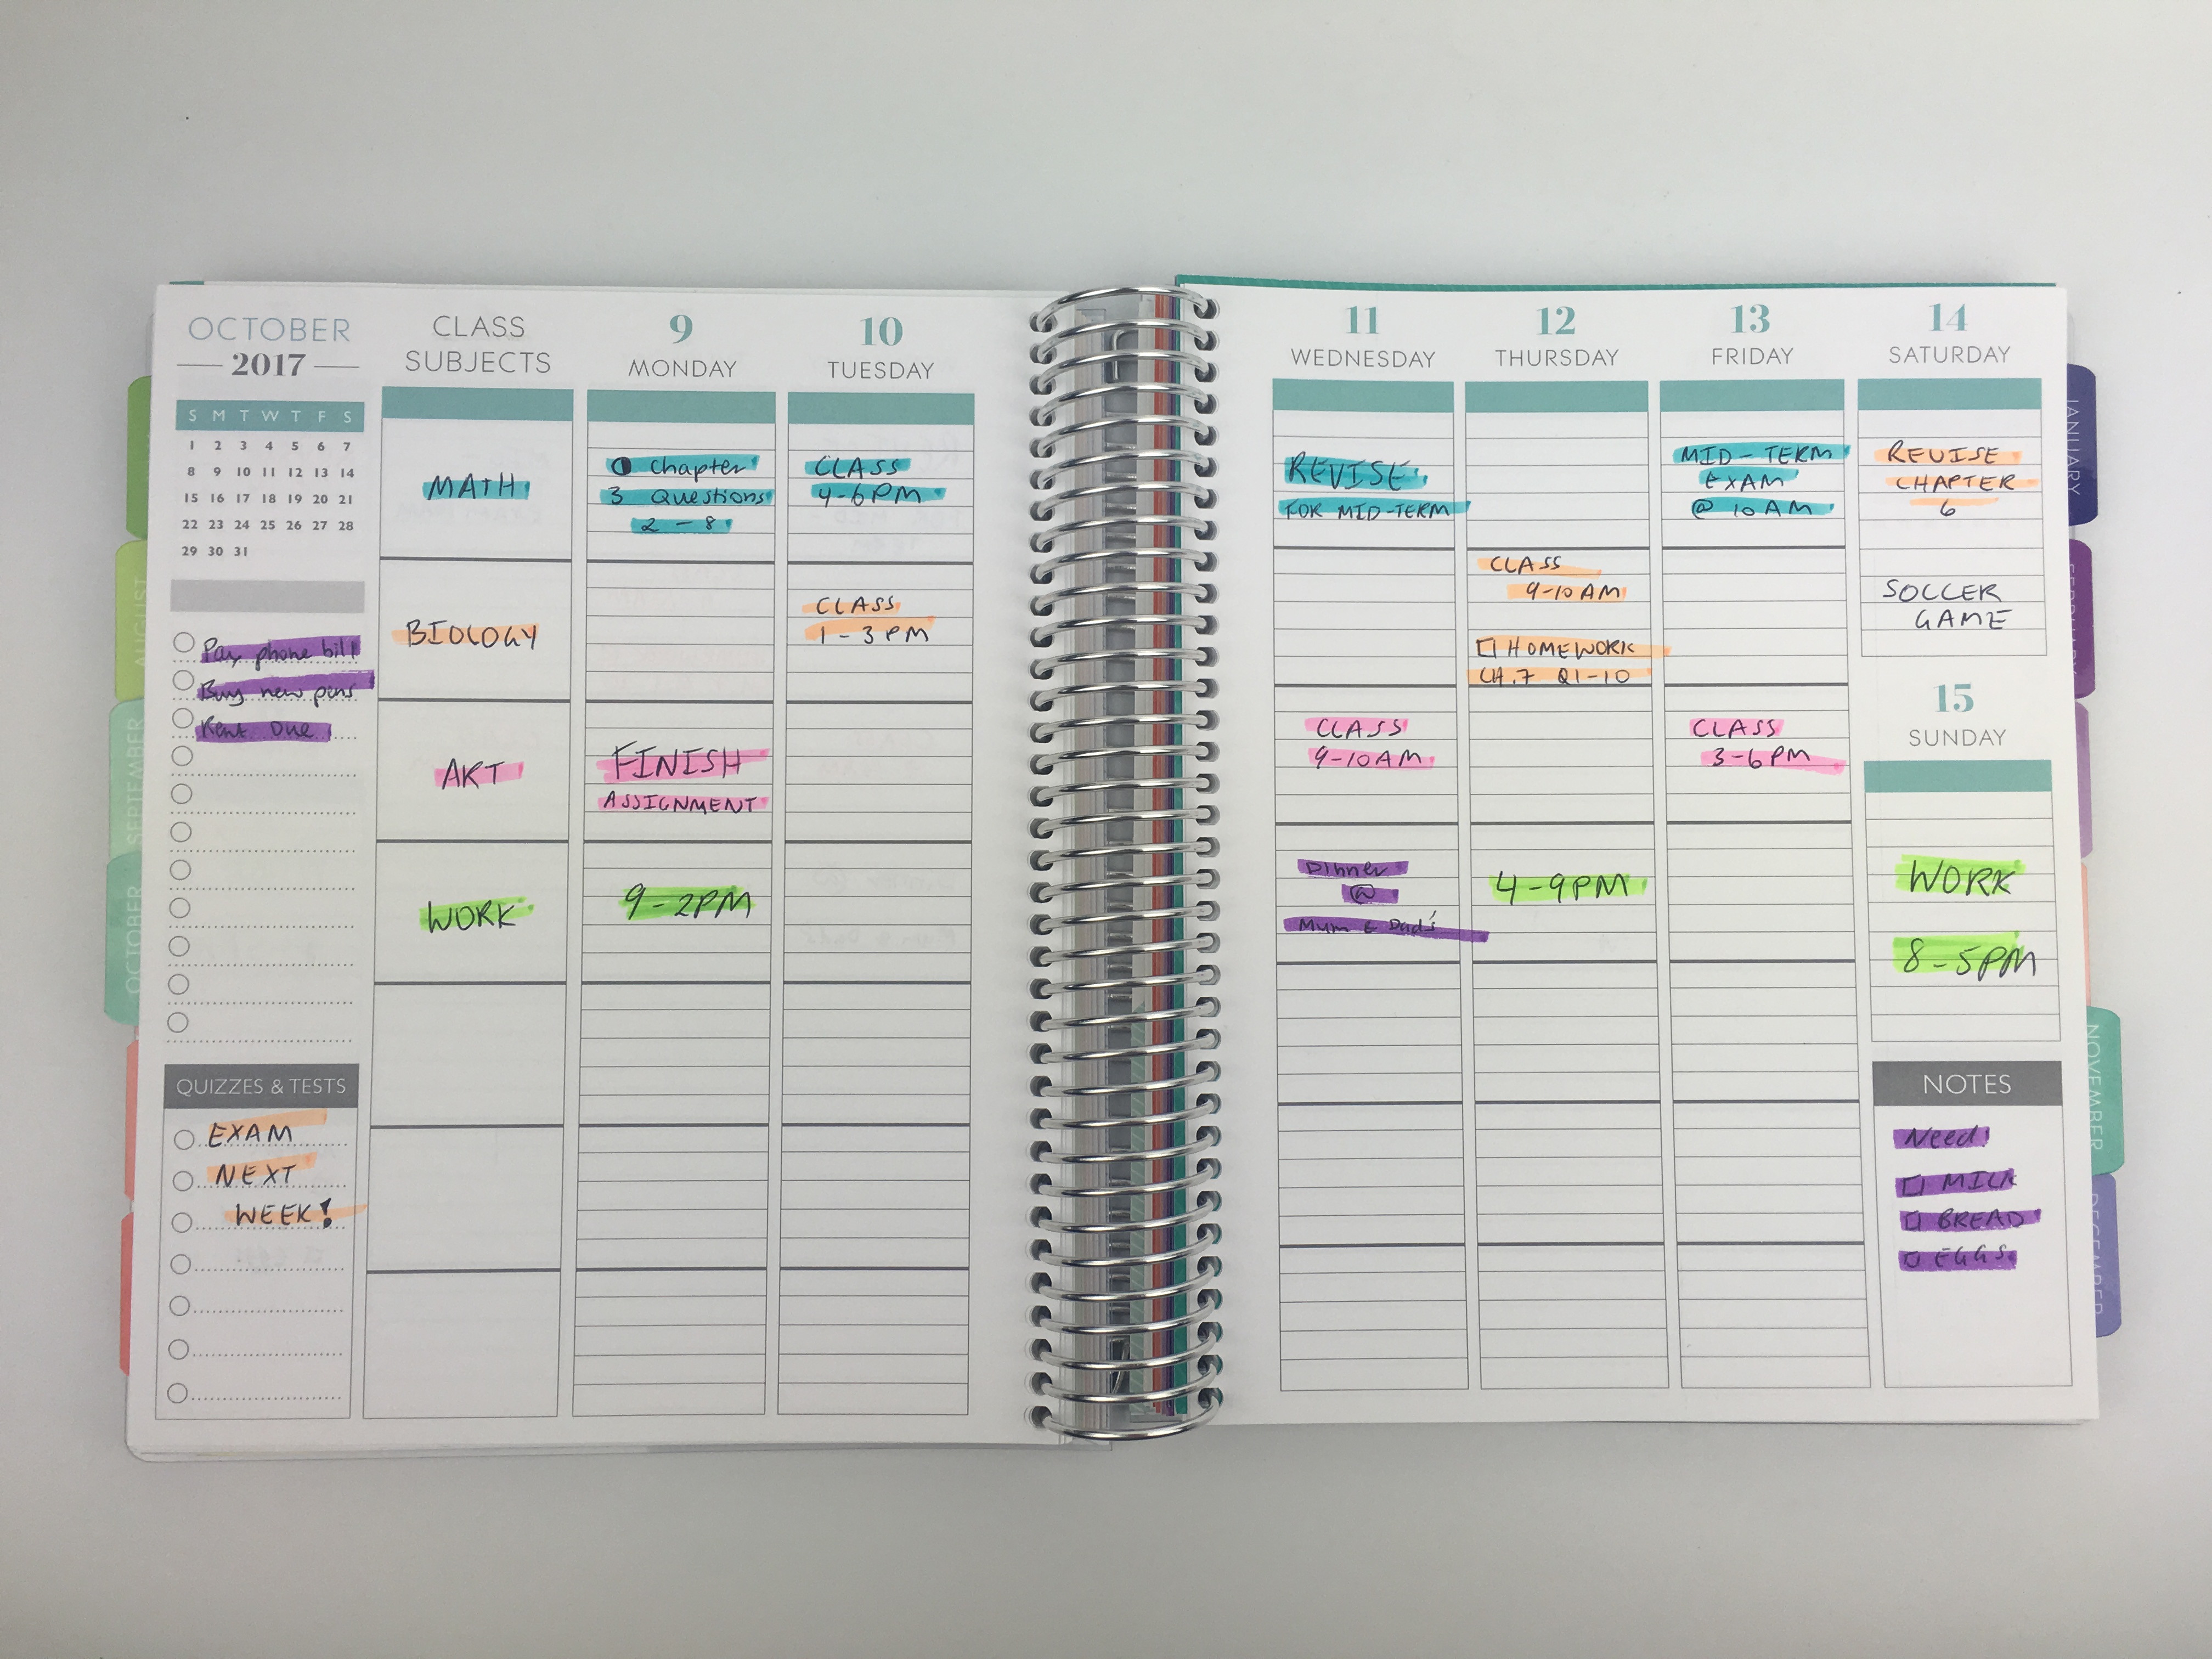 How to color code your planner for school using pens - All About Planners